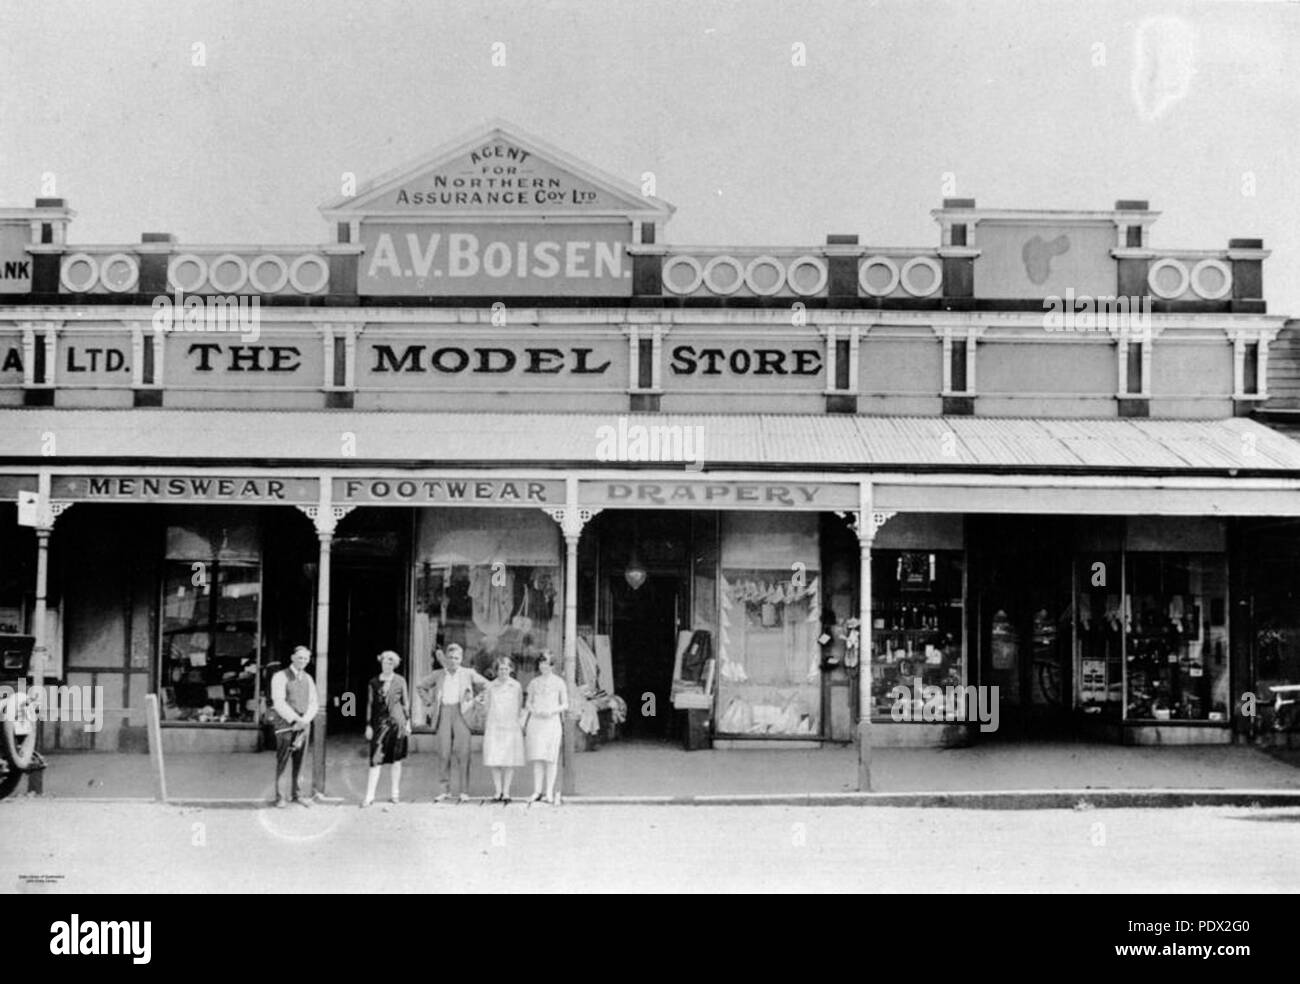 244 StateLibQld 1 180755 Staff posing in front of A. V. Boisen's store at Wondai, 1927 Stock Photo